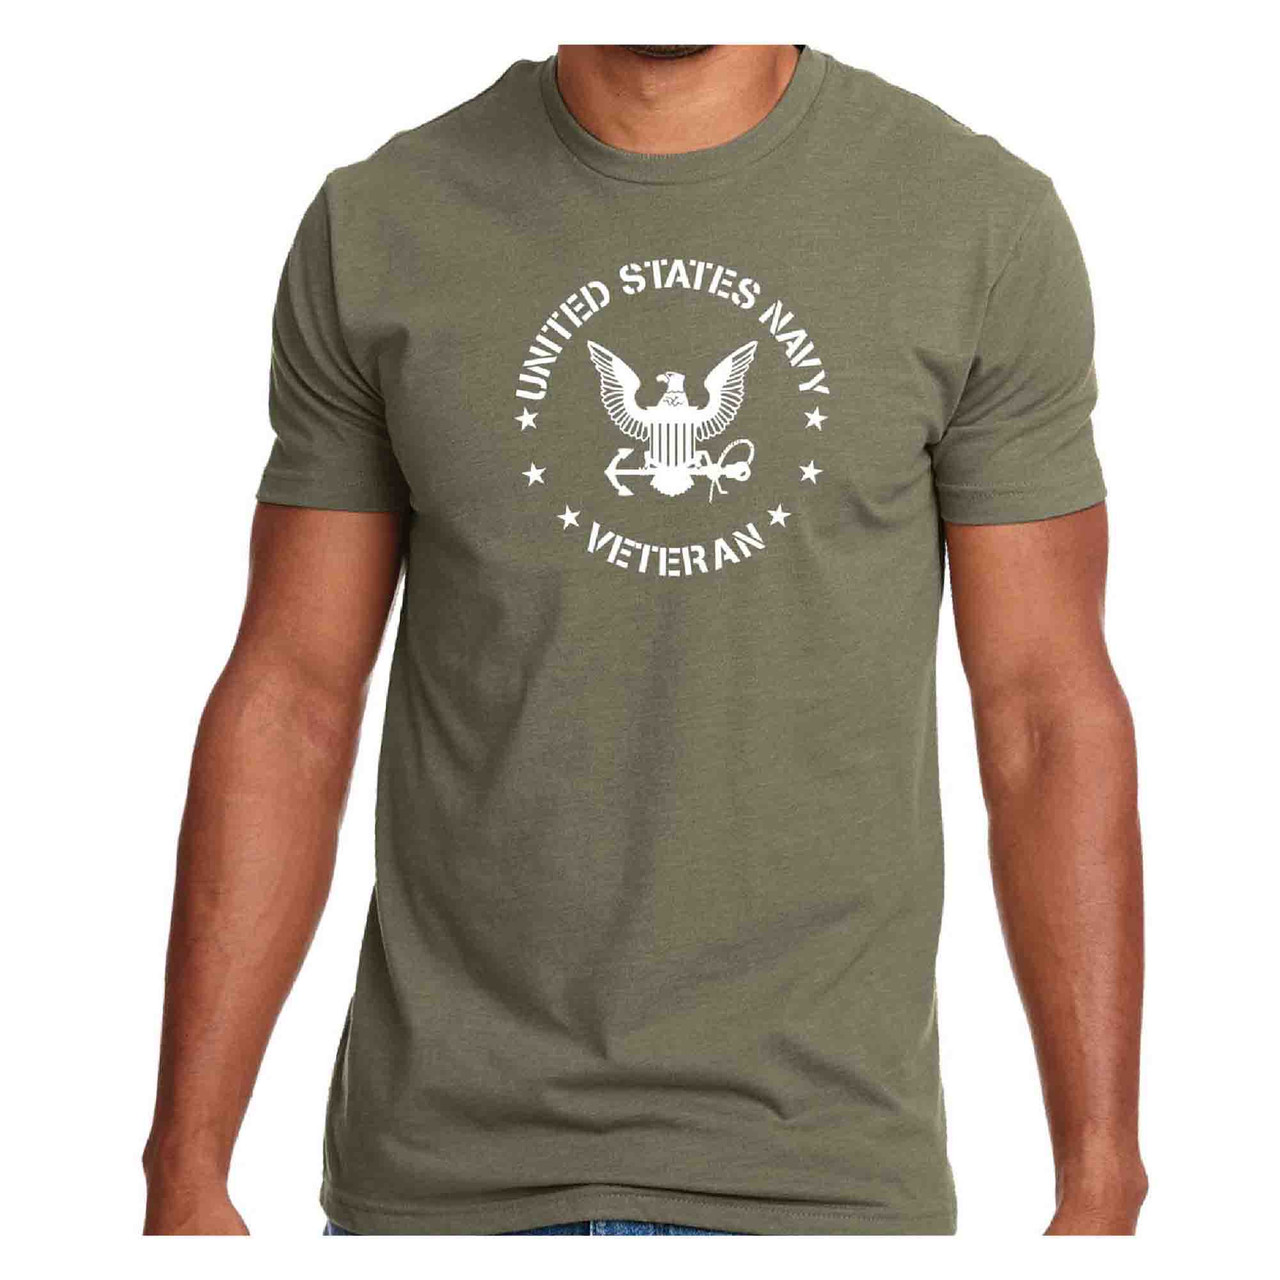 US Navy Veteran T-Shirt with Eagle Emblem Graphic olive drab front view